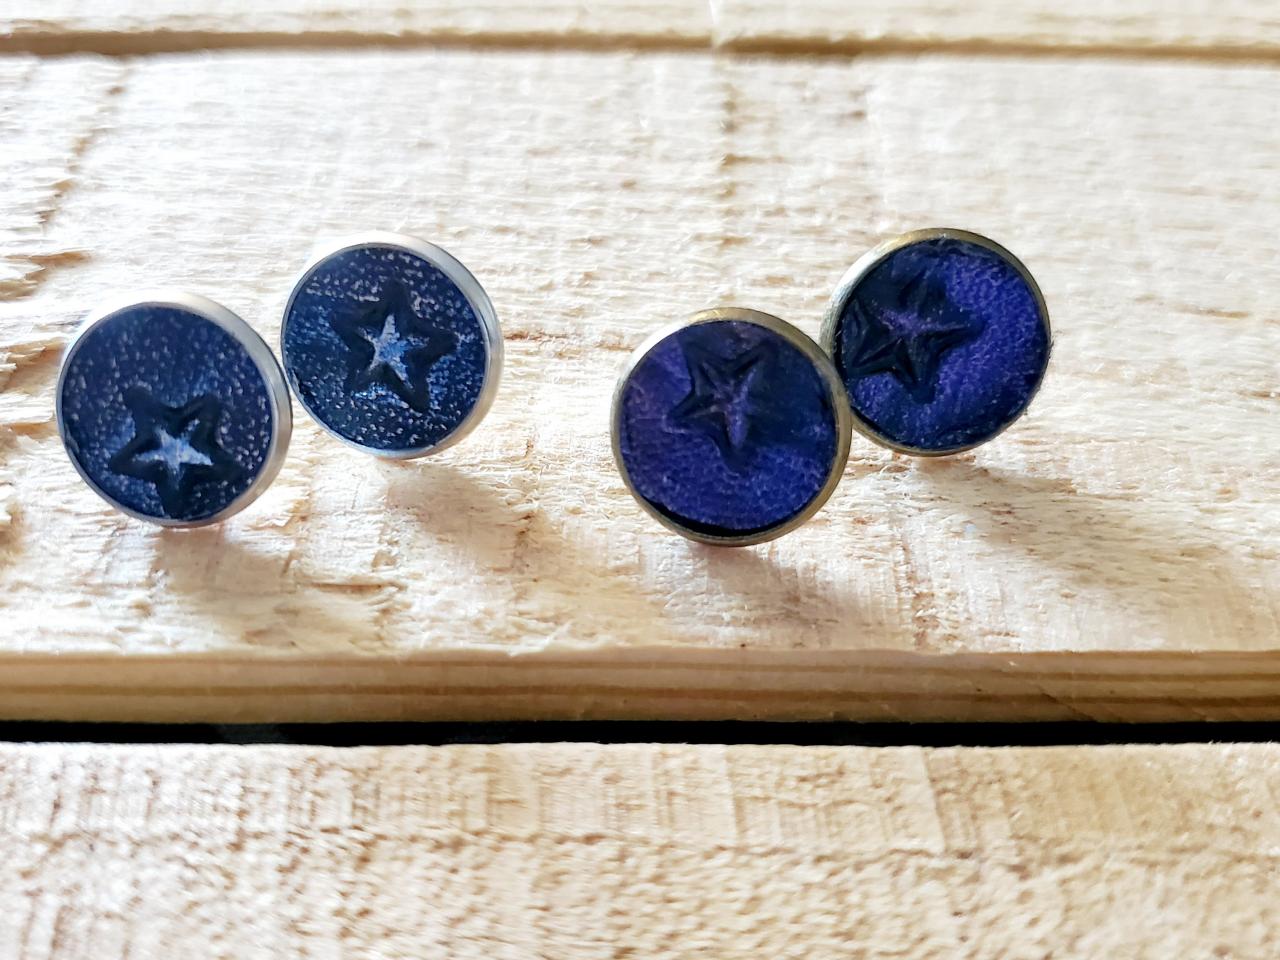 Leather Stud Earrings, Blue Distressed Post Earrings, Purple Post Earrings, Dainty Earrings, Rustic Leather Post Earrings, Womans Gift, Boho